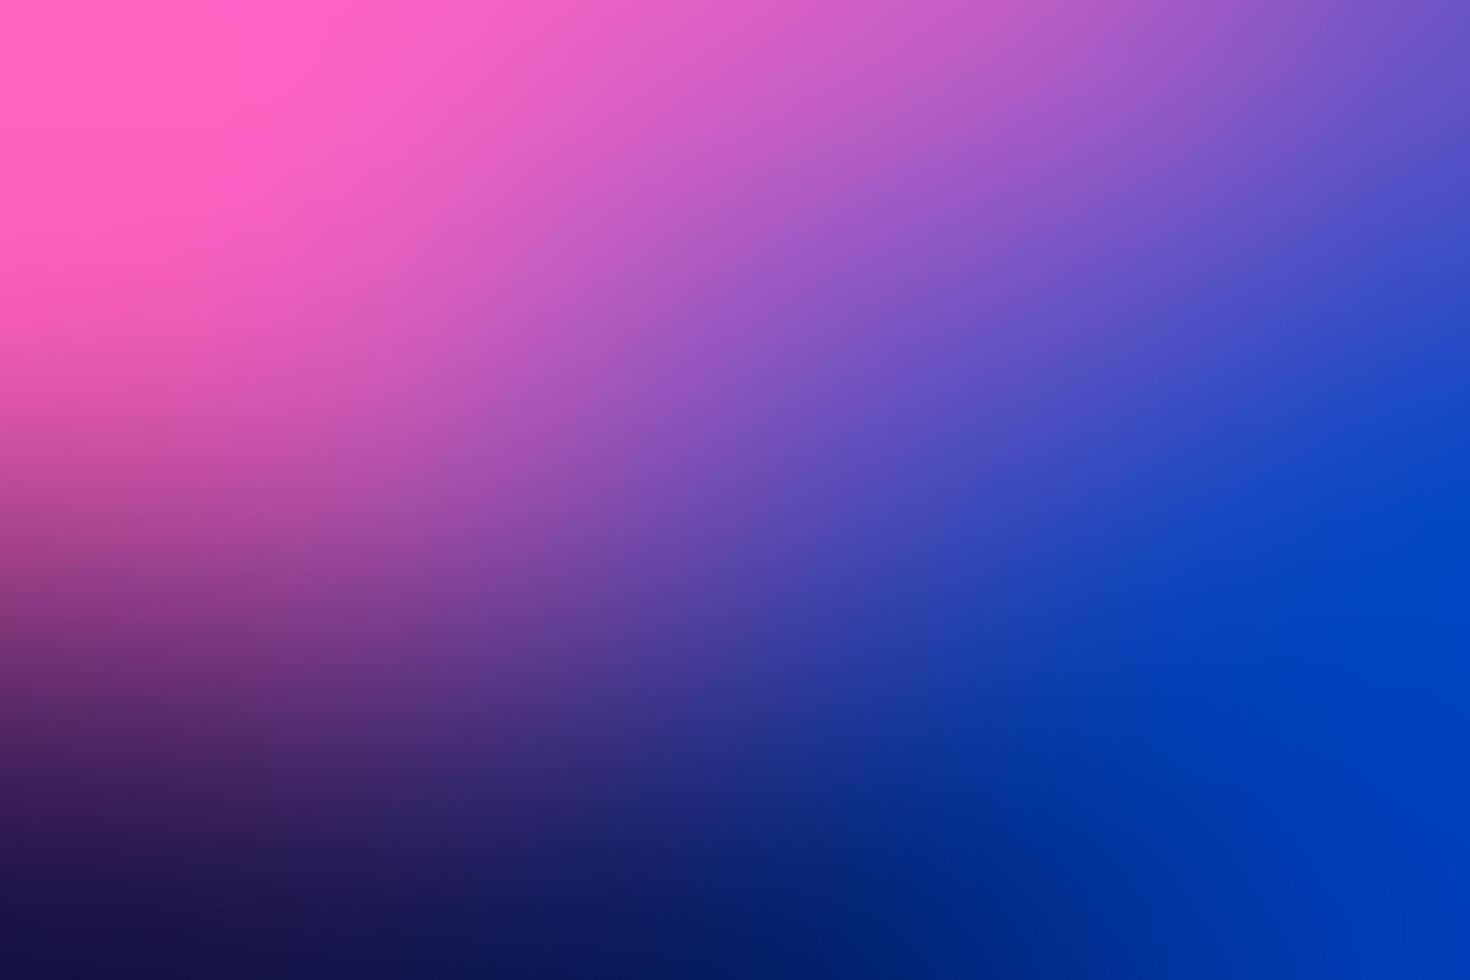 Abstract Blurred Gradient Background Design vector